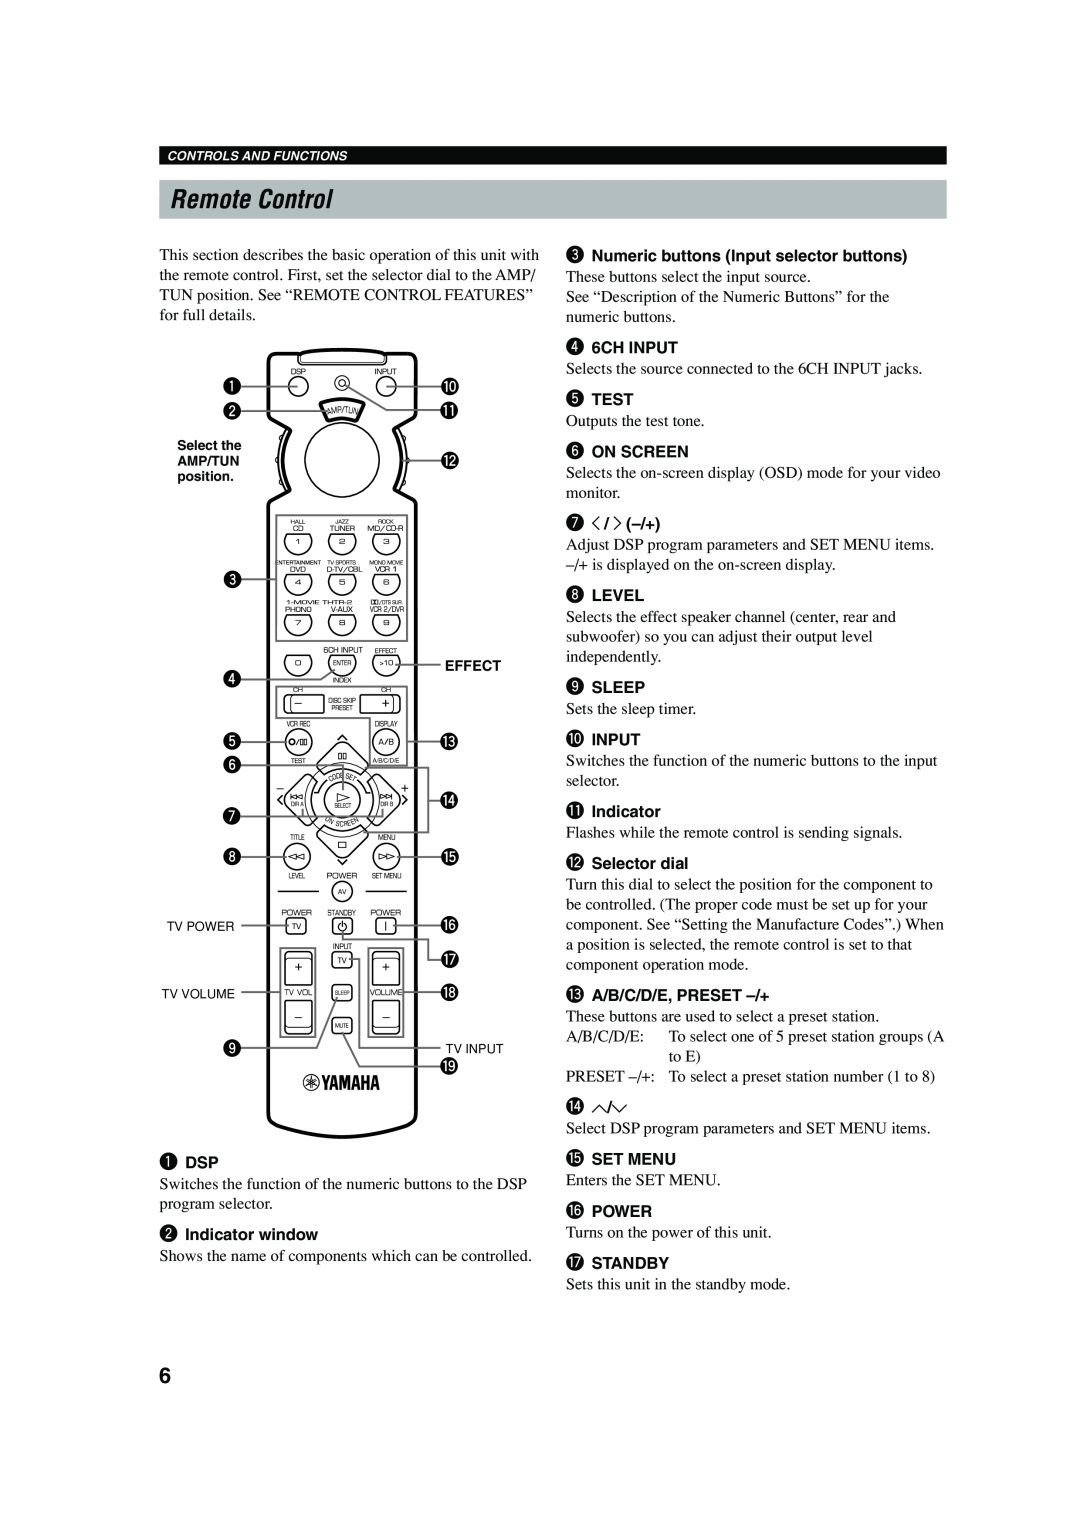 Yamaha RX-V620RDS Remote Control, 0 q w, r t y u, 3Numeric buttons Input selector buttons, 46CH INPUT, 1DSP, 5TEST, 8LEVEL 